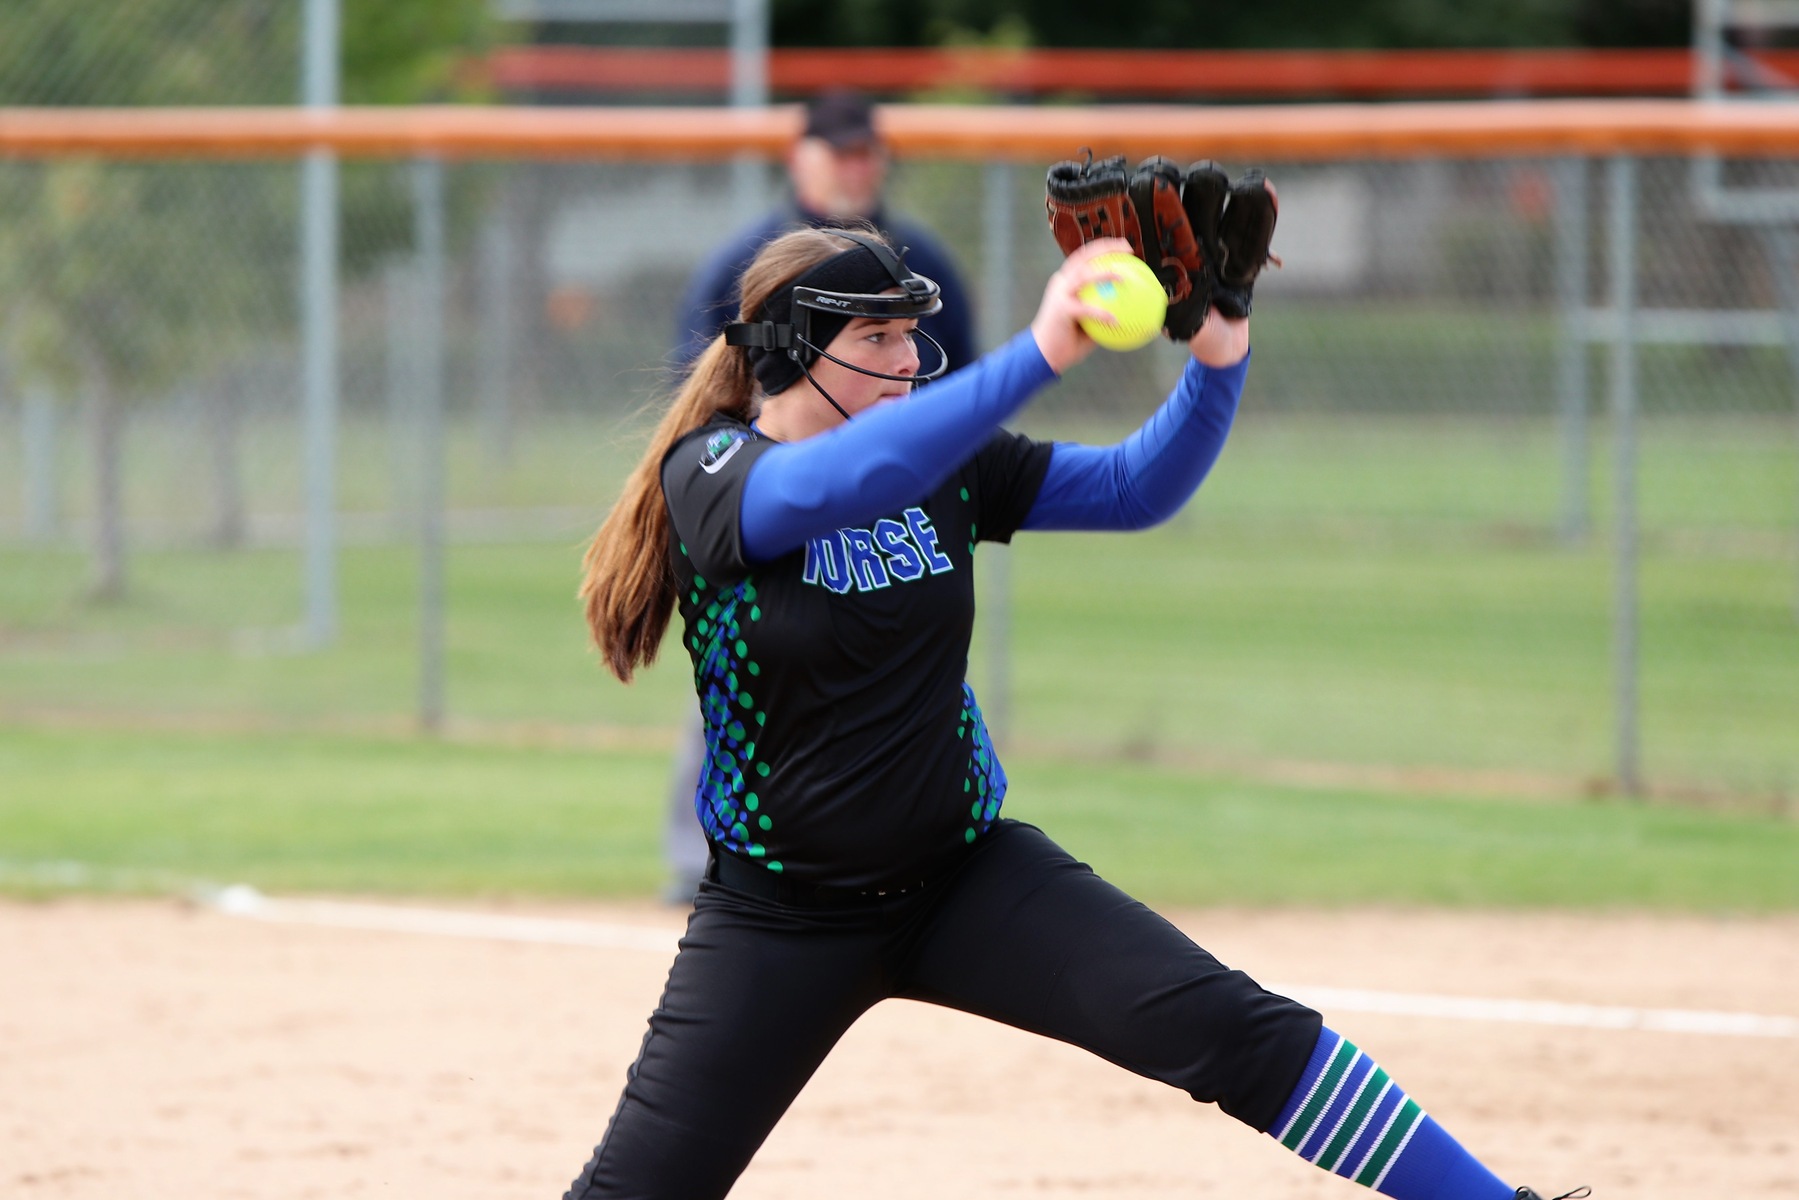 Lexi Winling bringing the ball above her head in her pitching motion